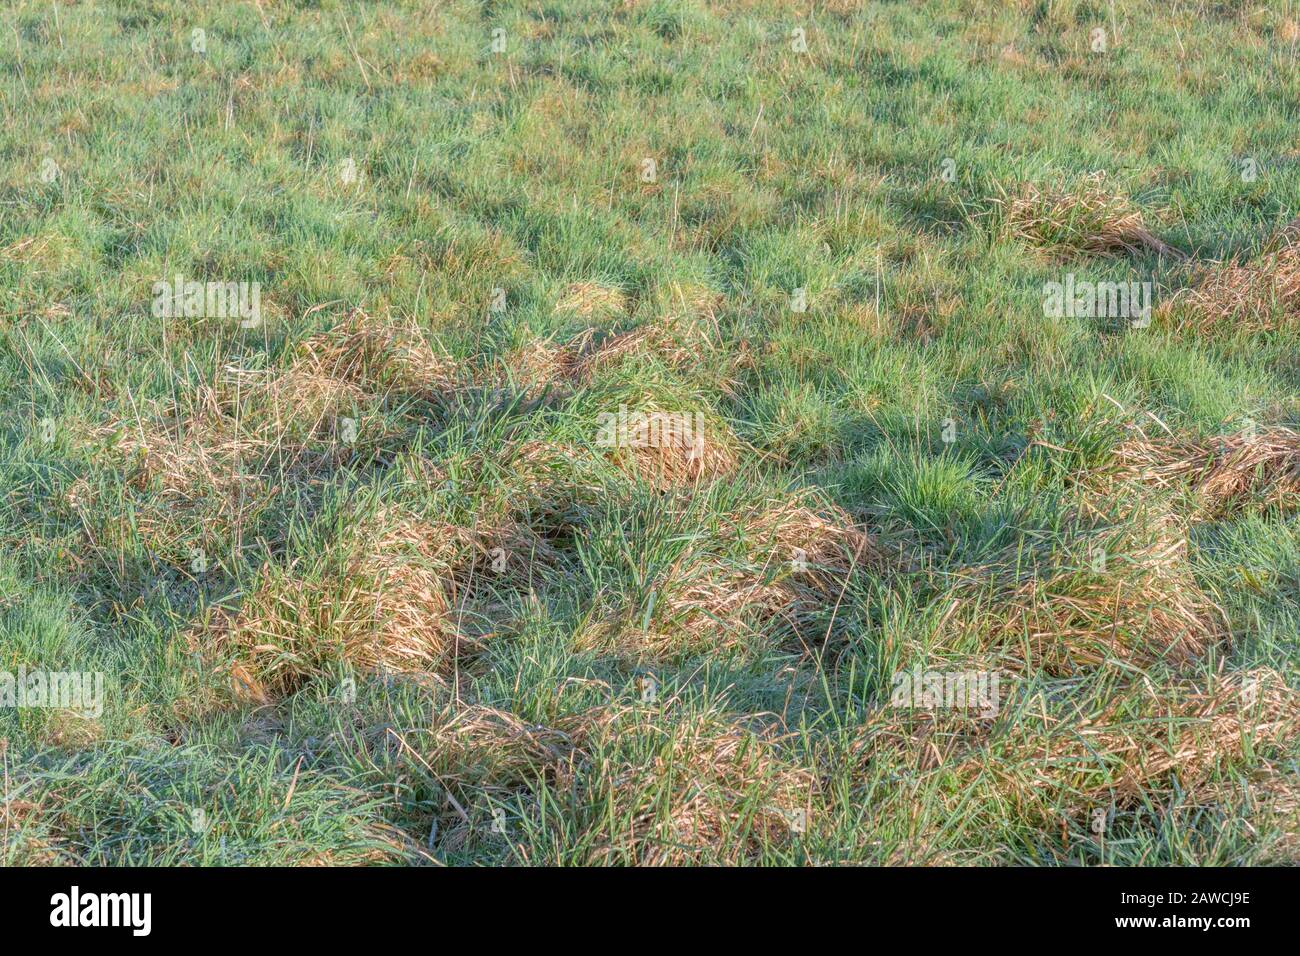 Tufts of grass touched by early morning winter sunshine. UK farming and agriculture concept, pasture and grazing activity potentially. Stock Photo